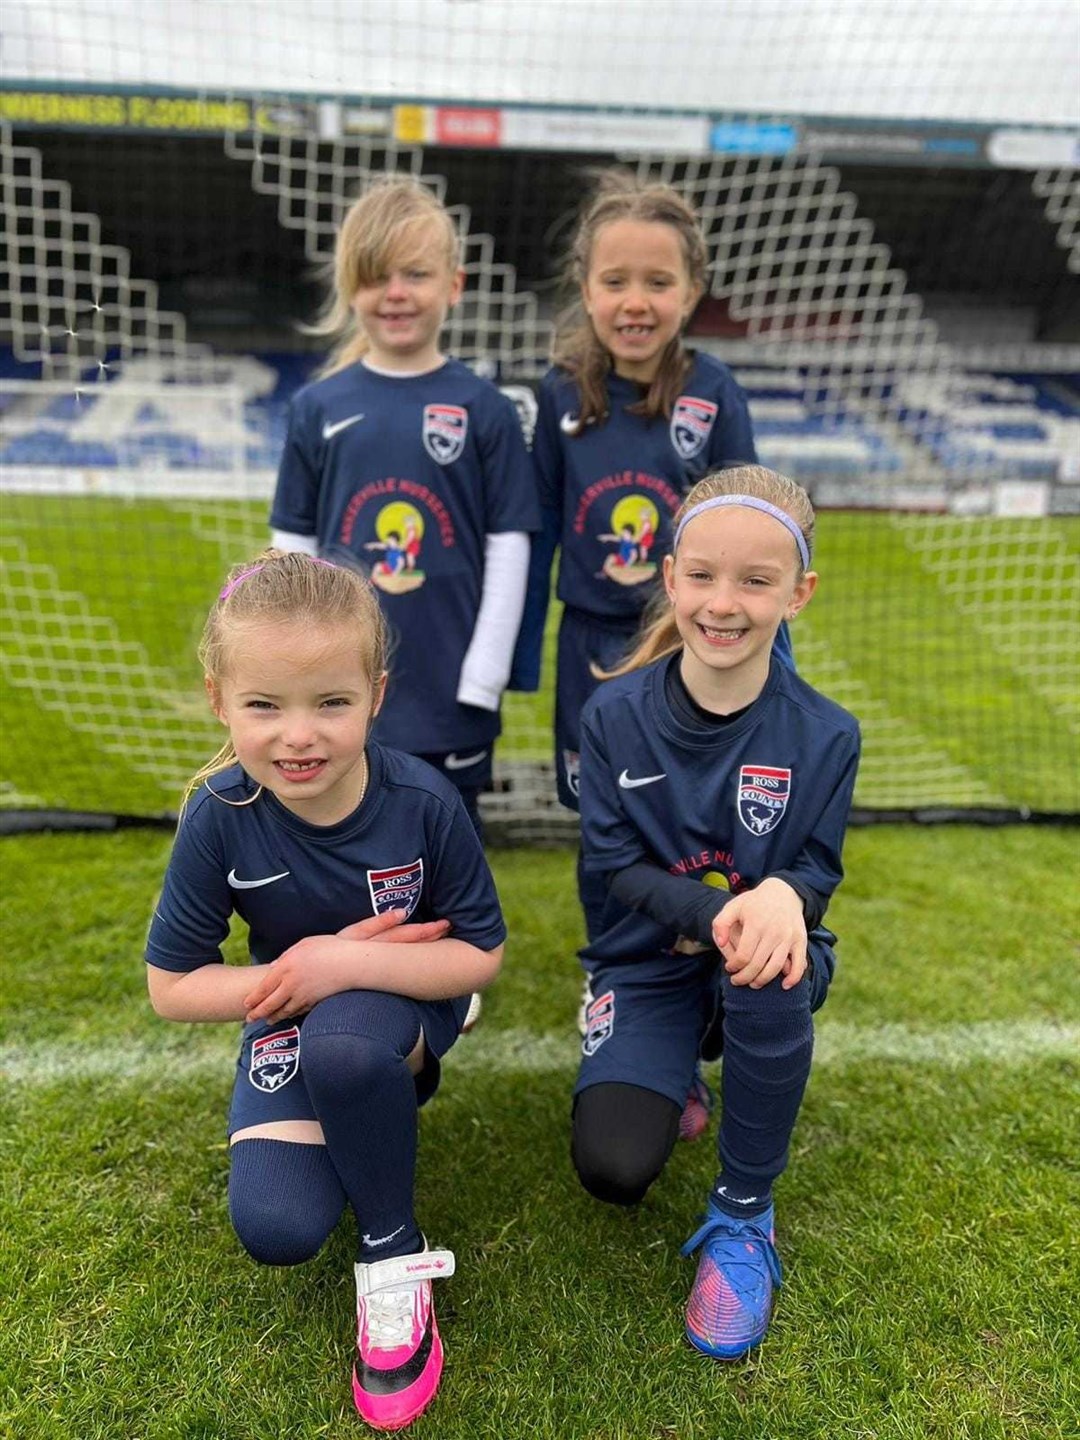 Some of the U8 team with Ross County Girls and Women Football Club.